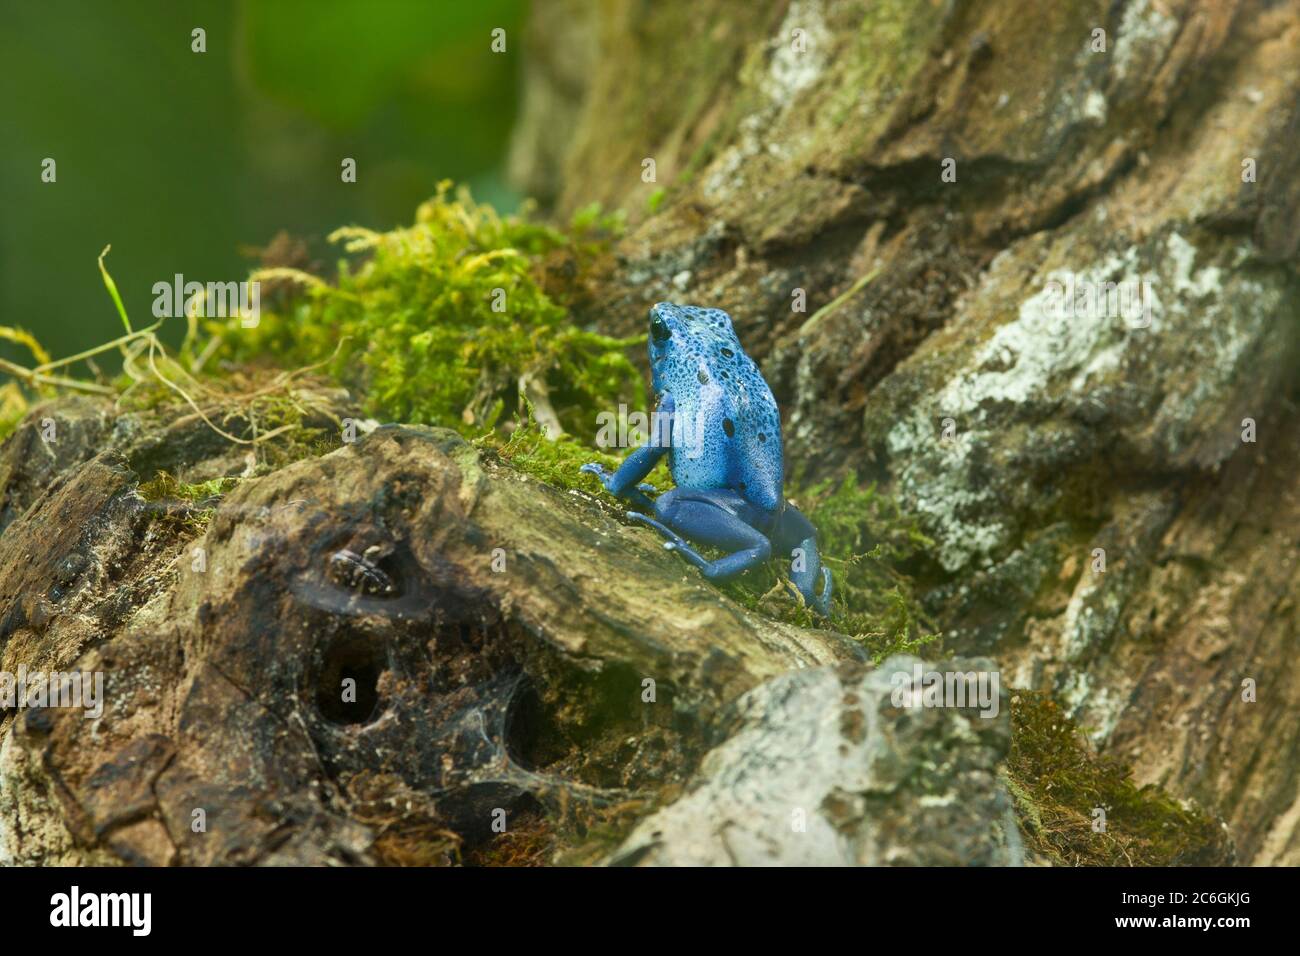 Tiny frog, micro frog, poison dart frog, Sky-blue, tropical frog, mini frog, poisonous, tiny but deadly, small but deadly, frog on plant, Stock Photo